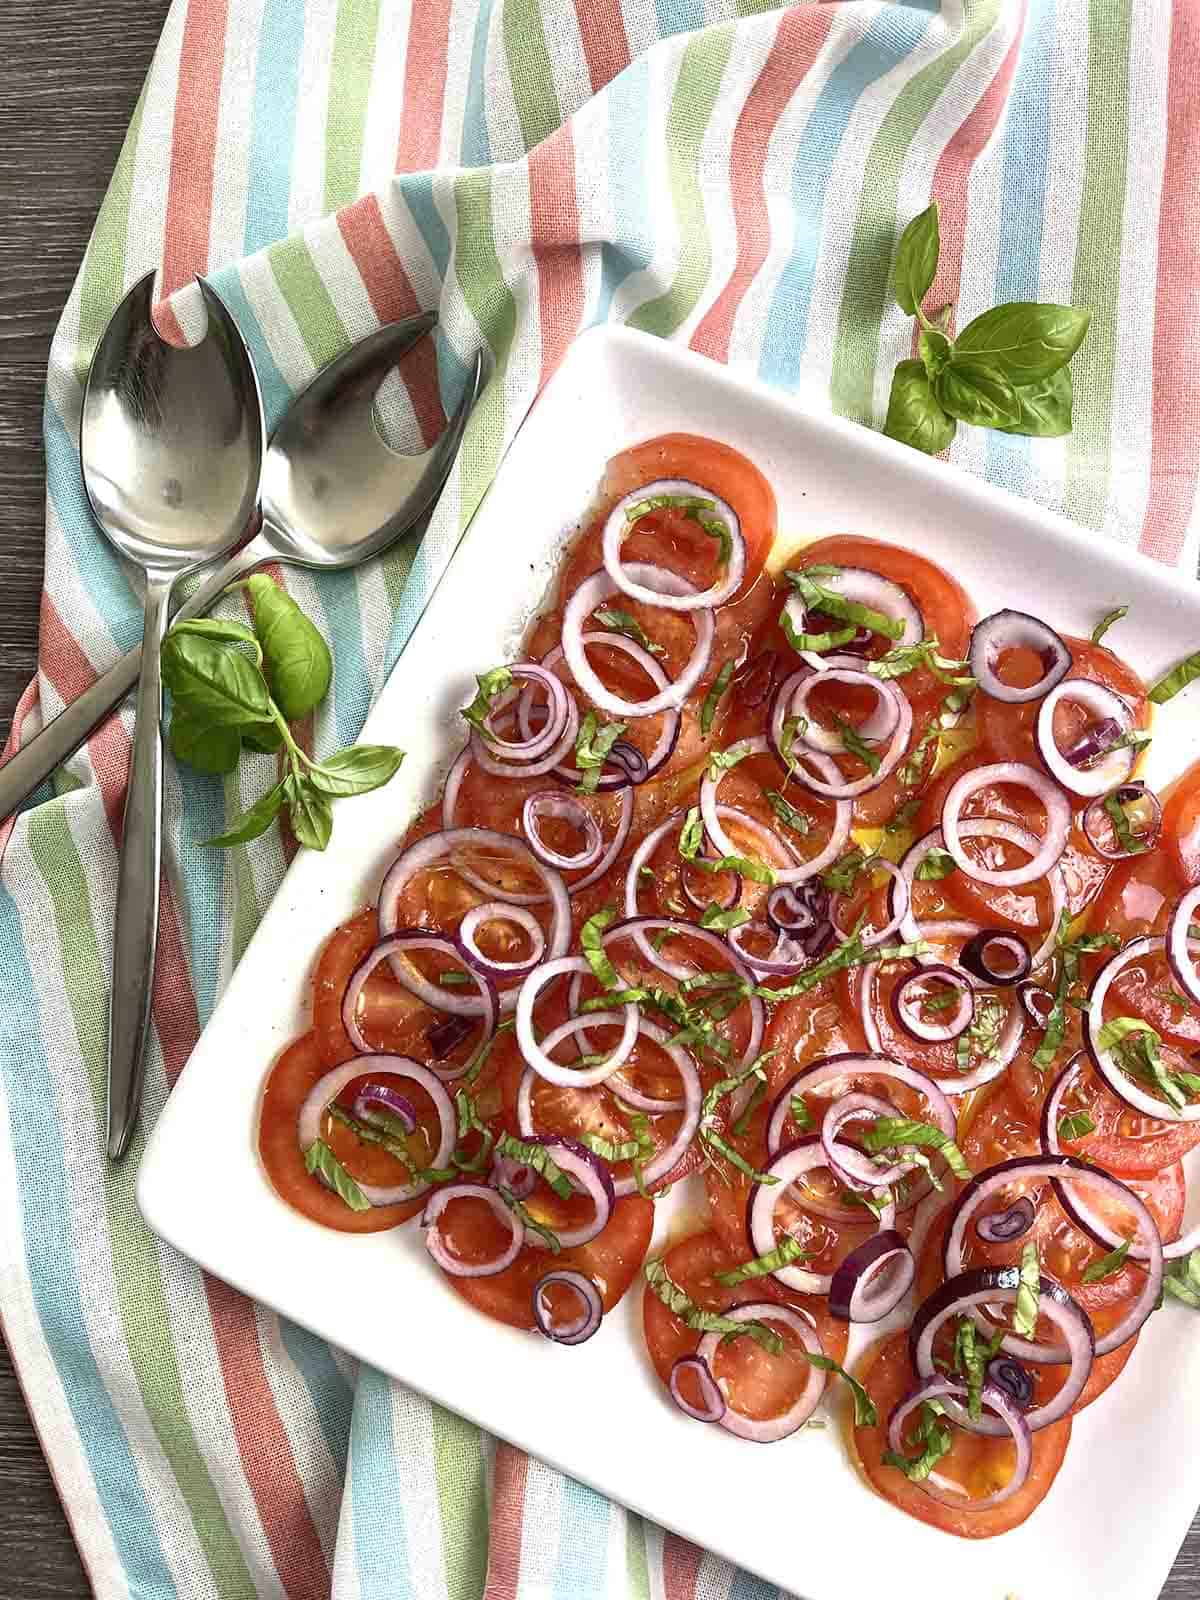 tomato and onion salad on a plate.